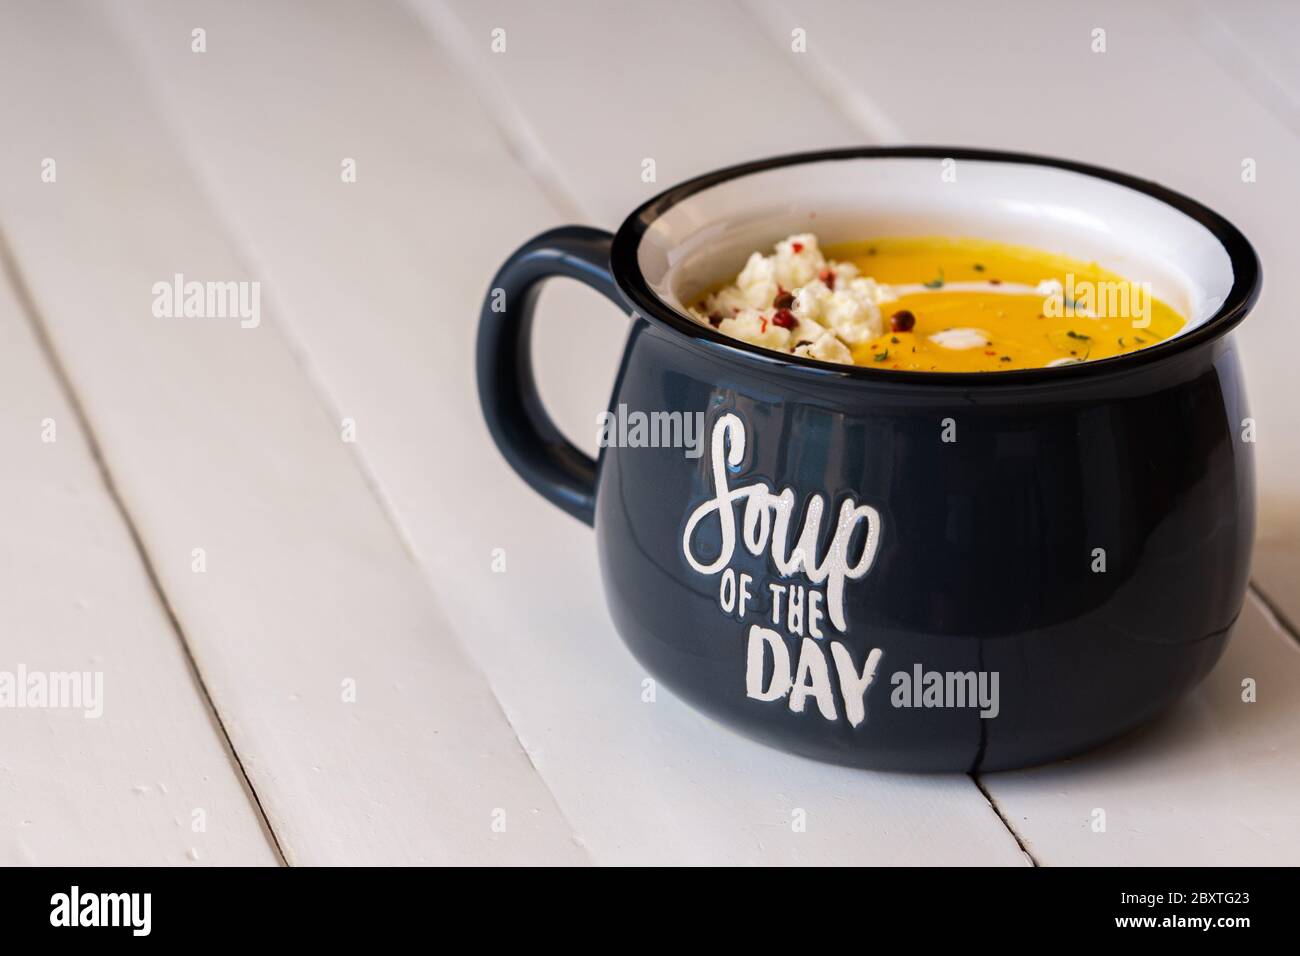 Pumpkin soup in a blue bowl isolated. Inscription: soup of the day. Vegetarian lunch or dinner. Healthy food concept. Copy space.  Stock Photo